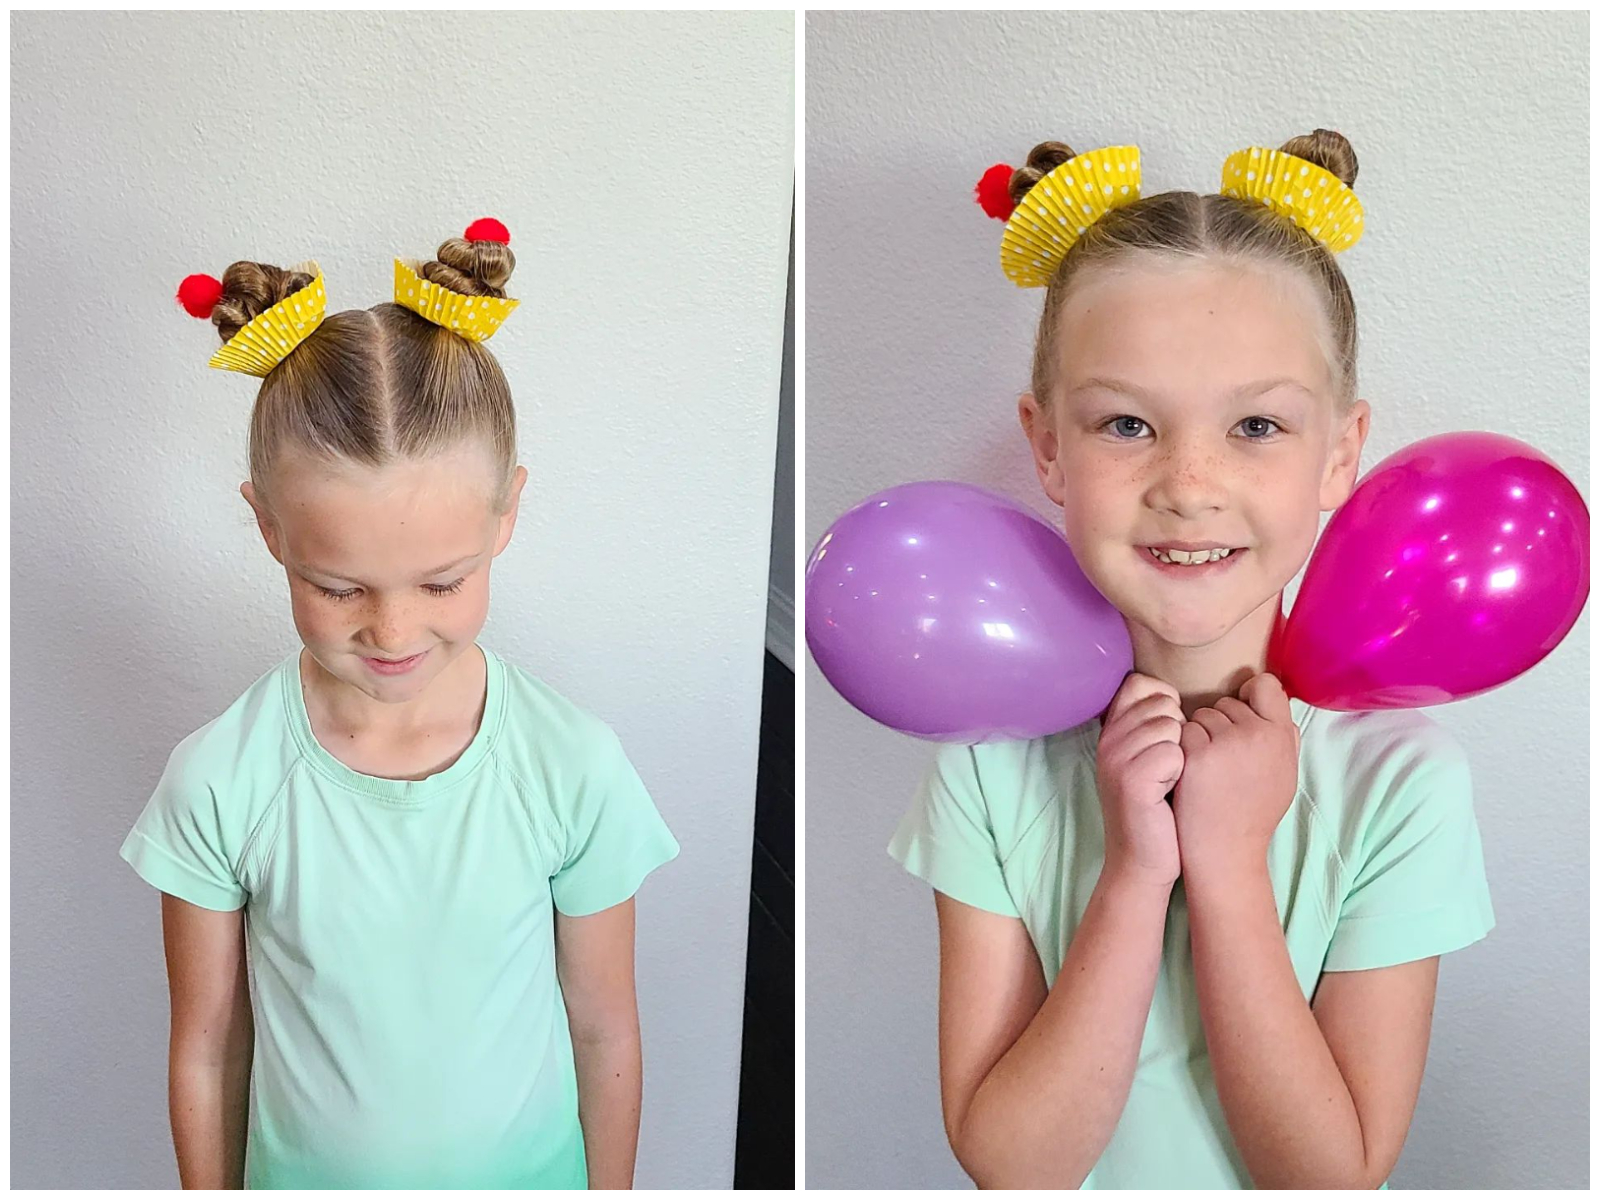 30 unique Crazy Hair Day ideas for girls Wacky Hair Day ideas to try